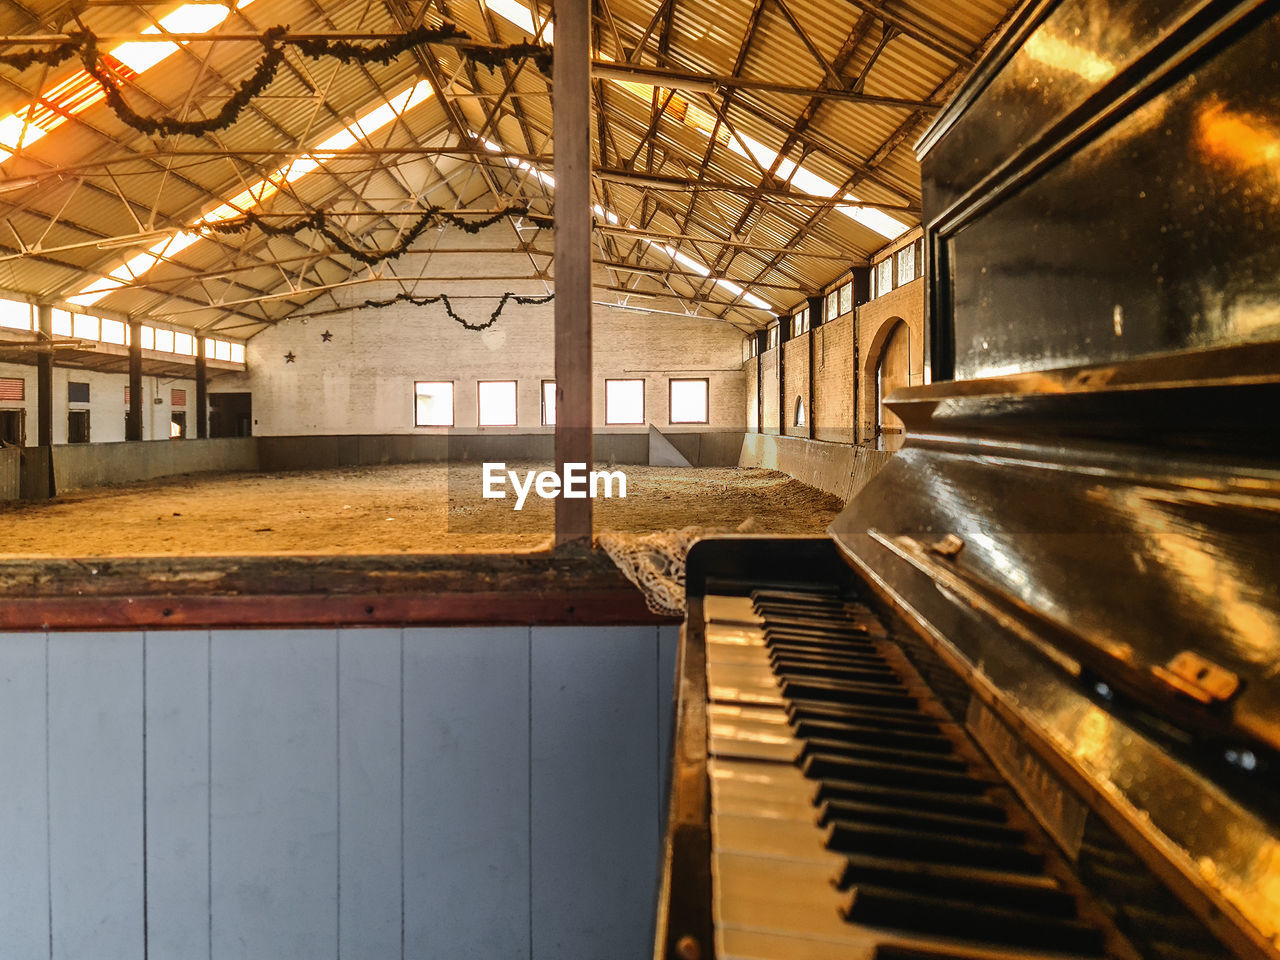 Piano in manege